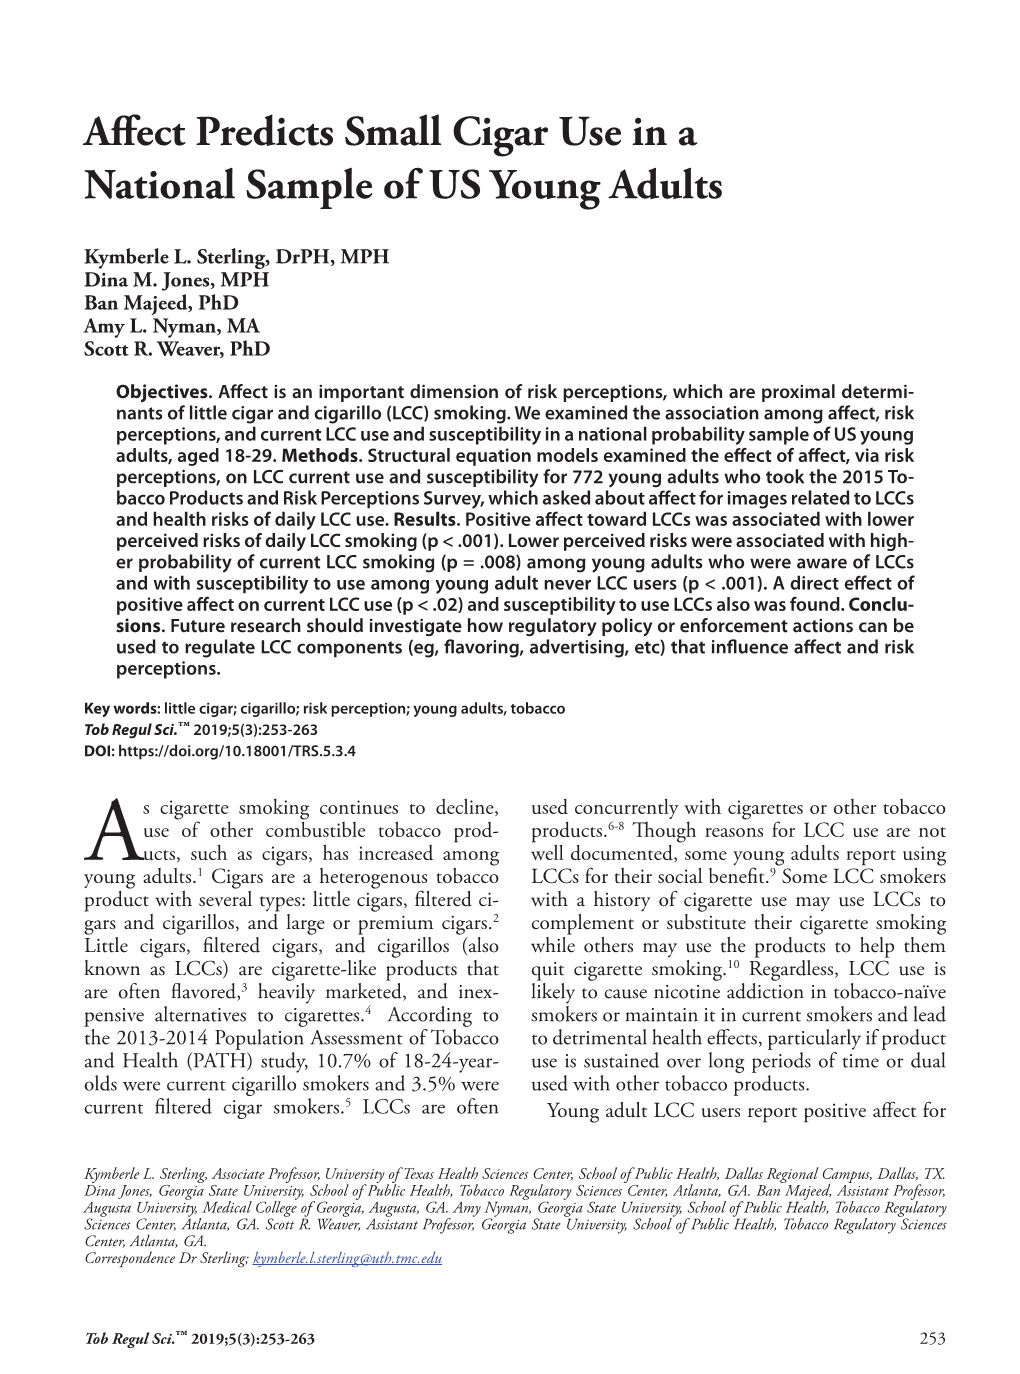 Affect Predicts Small Cigar Use in a National Sample of US Young Adults